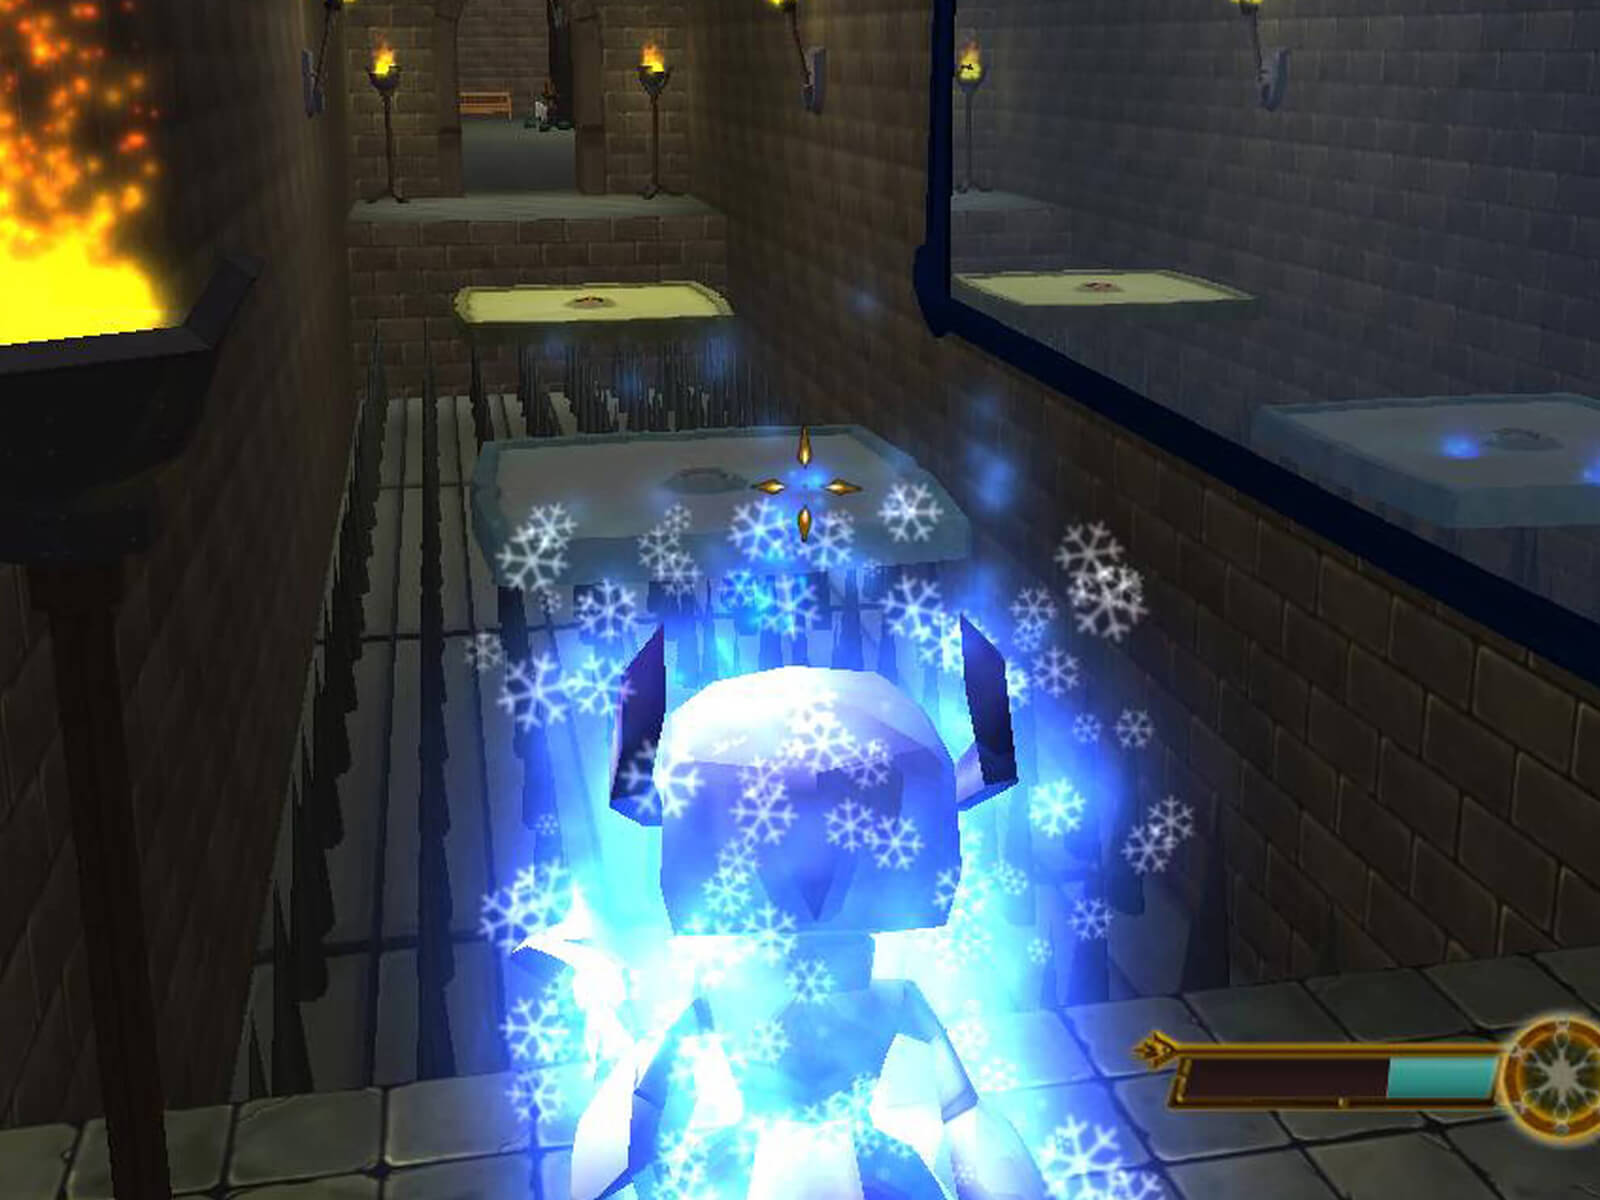 Character seen from behind glowing blue with snowflakes hovering around him, looking across a spike pit